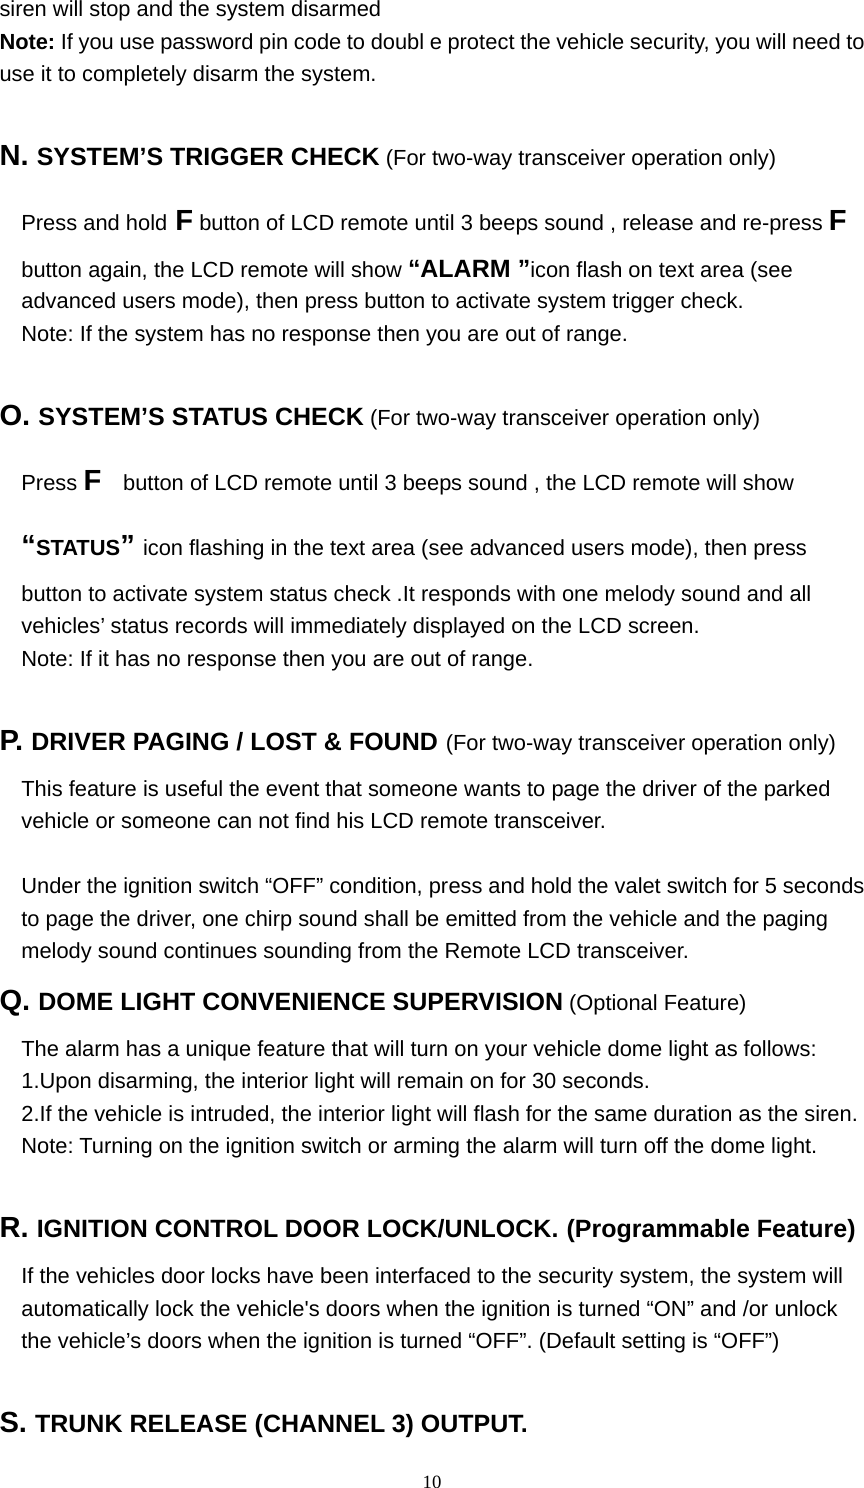  10siren will stop and the system disarmed Note: If you use password pin code to doubl e protect the vehicle security, you will need to use it to completely disarm the system.  N. SYSTEM’S TRIGGER CHECK (For two-way transceiver operation only) Press and hold F button of LCD remote until 3 beeps sound , release and re-press F button again, the LCD remote will show “ALARM ”icon flash on text area (see advanced users mode), then press button to activate system trigger check. Note: If the system has no response then you are out of range.  O. SYSTEM’S STATUS CHECK (For two-way transceiver operation only) Press F    button of LCD remote until 3 beeps sound , the LCD remote will show “STATUS” icon flashing in the text area (see advanced users mode), then press button to activate system status check .It responds with one melody sound and all vehicles’ status records will immediately displayed on the LCD screen. Note: If it has no response then you are out of range.  P.  DRIVER PAGING / LOST &amp; FOUND (For two-way transceiver operation only) This feature is useful the event that someone wants to page the driver of the parked vehicle or someone can not find his LCD remote transceiver.  Under the ignition switch “OFF” condition, press and hold the valet switch for 5 seconds to page the driver, one chirp sound shall be emitted from the vehicle and the paging melody sound continues sounding from the Remote LCD transceiver. Q. DOME LIGHT CONVENIENCE SUPERVISION (Optional Feature) The alarm has a unique feature that will turn on your vehicle dome light as follows: 1.Upon disarming, the interior light will remain on for 30 seconds. 2.If the vehicle is intruded, the interior light will flash for the same duration as the siren. Note: Turning on the ignition switch or arming the alarm will turn off the dome light.  R. IGNITION CONTROL DOOR LOCK/UNLOCK. (Programmable Feature) If the vehicles door locks have been interfaced to the security system, the system will automatically lock the vehicle&apos;s doors when the ignition is turned “ON” and /or unlock the vehicle’s doors when the ignition is turned “OFF”. (Default setting is “OFF”)  S. TRUNK RELEASE (CHANNEL 3) OUTPUT. 